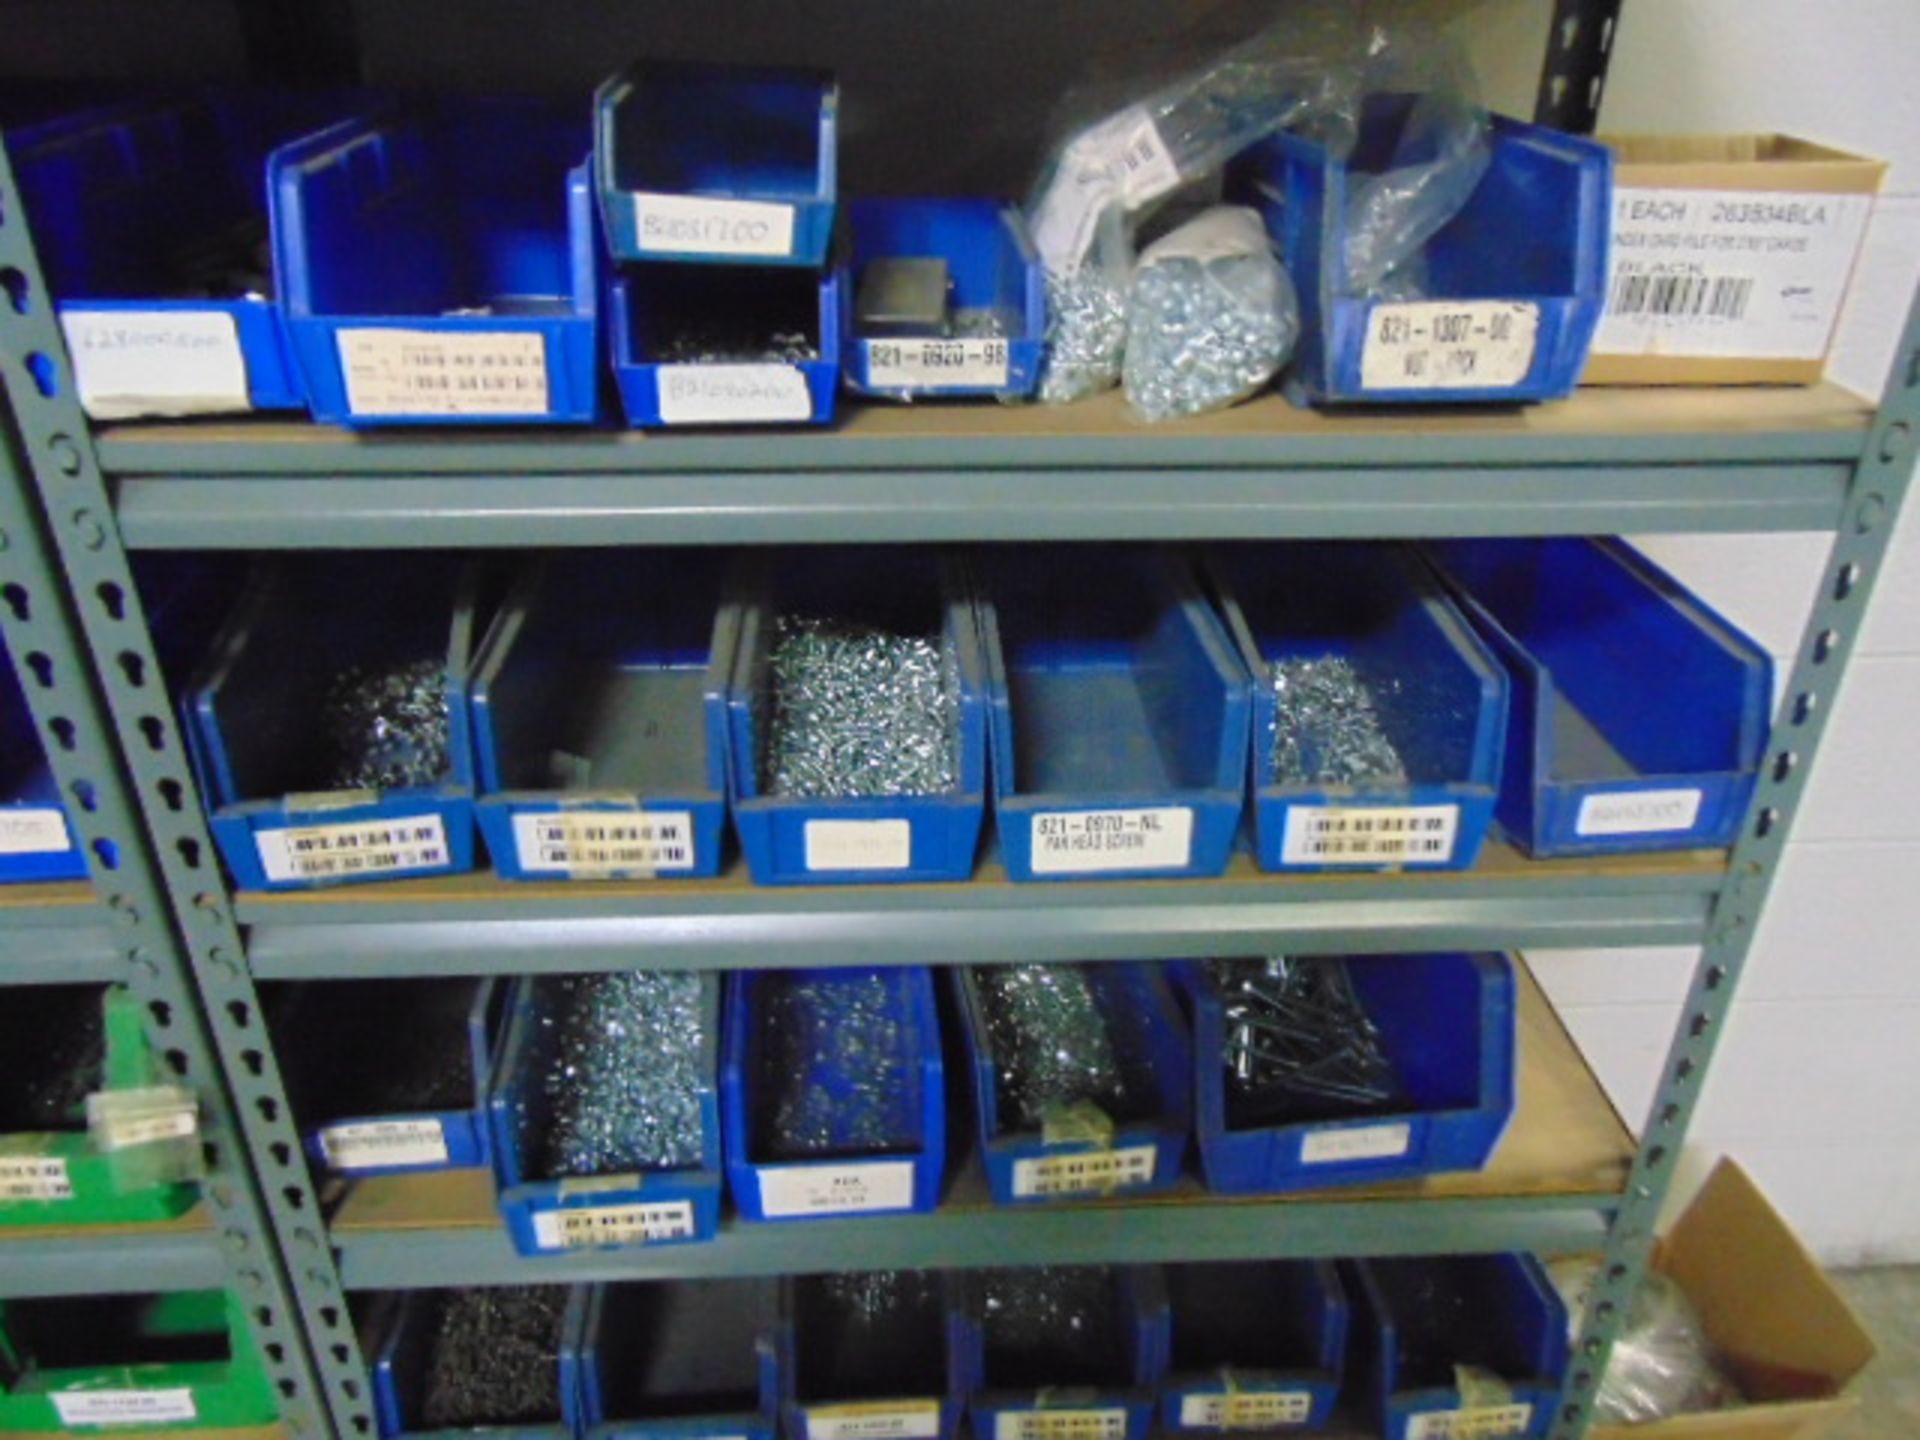 LOT CONSISTING OF: screws, nuts & fasteners, w/ rack, assorted - Image 4 of 4